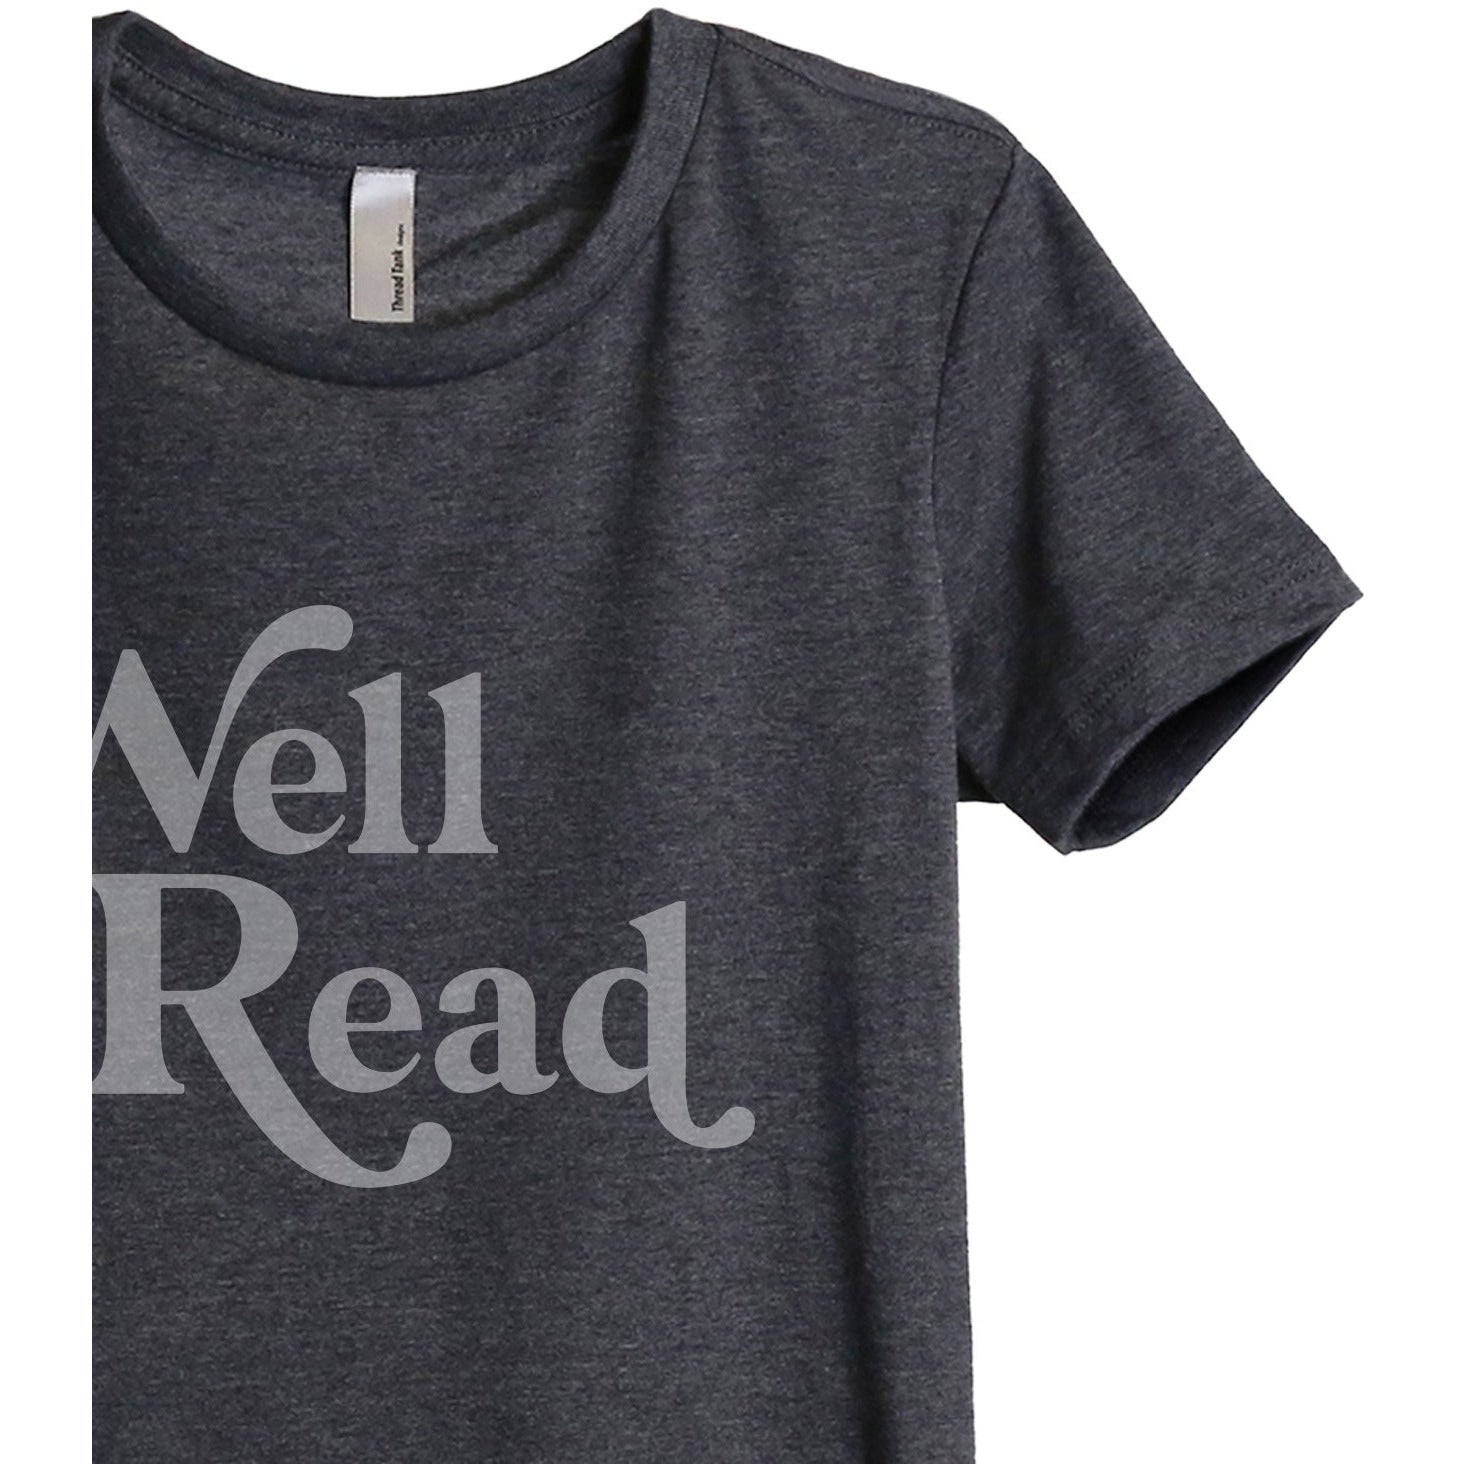 Well Read - Stories You Can Wear